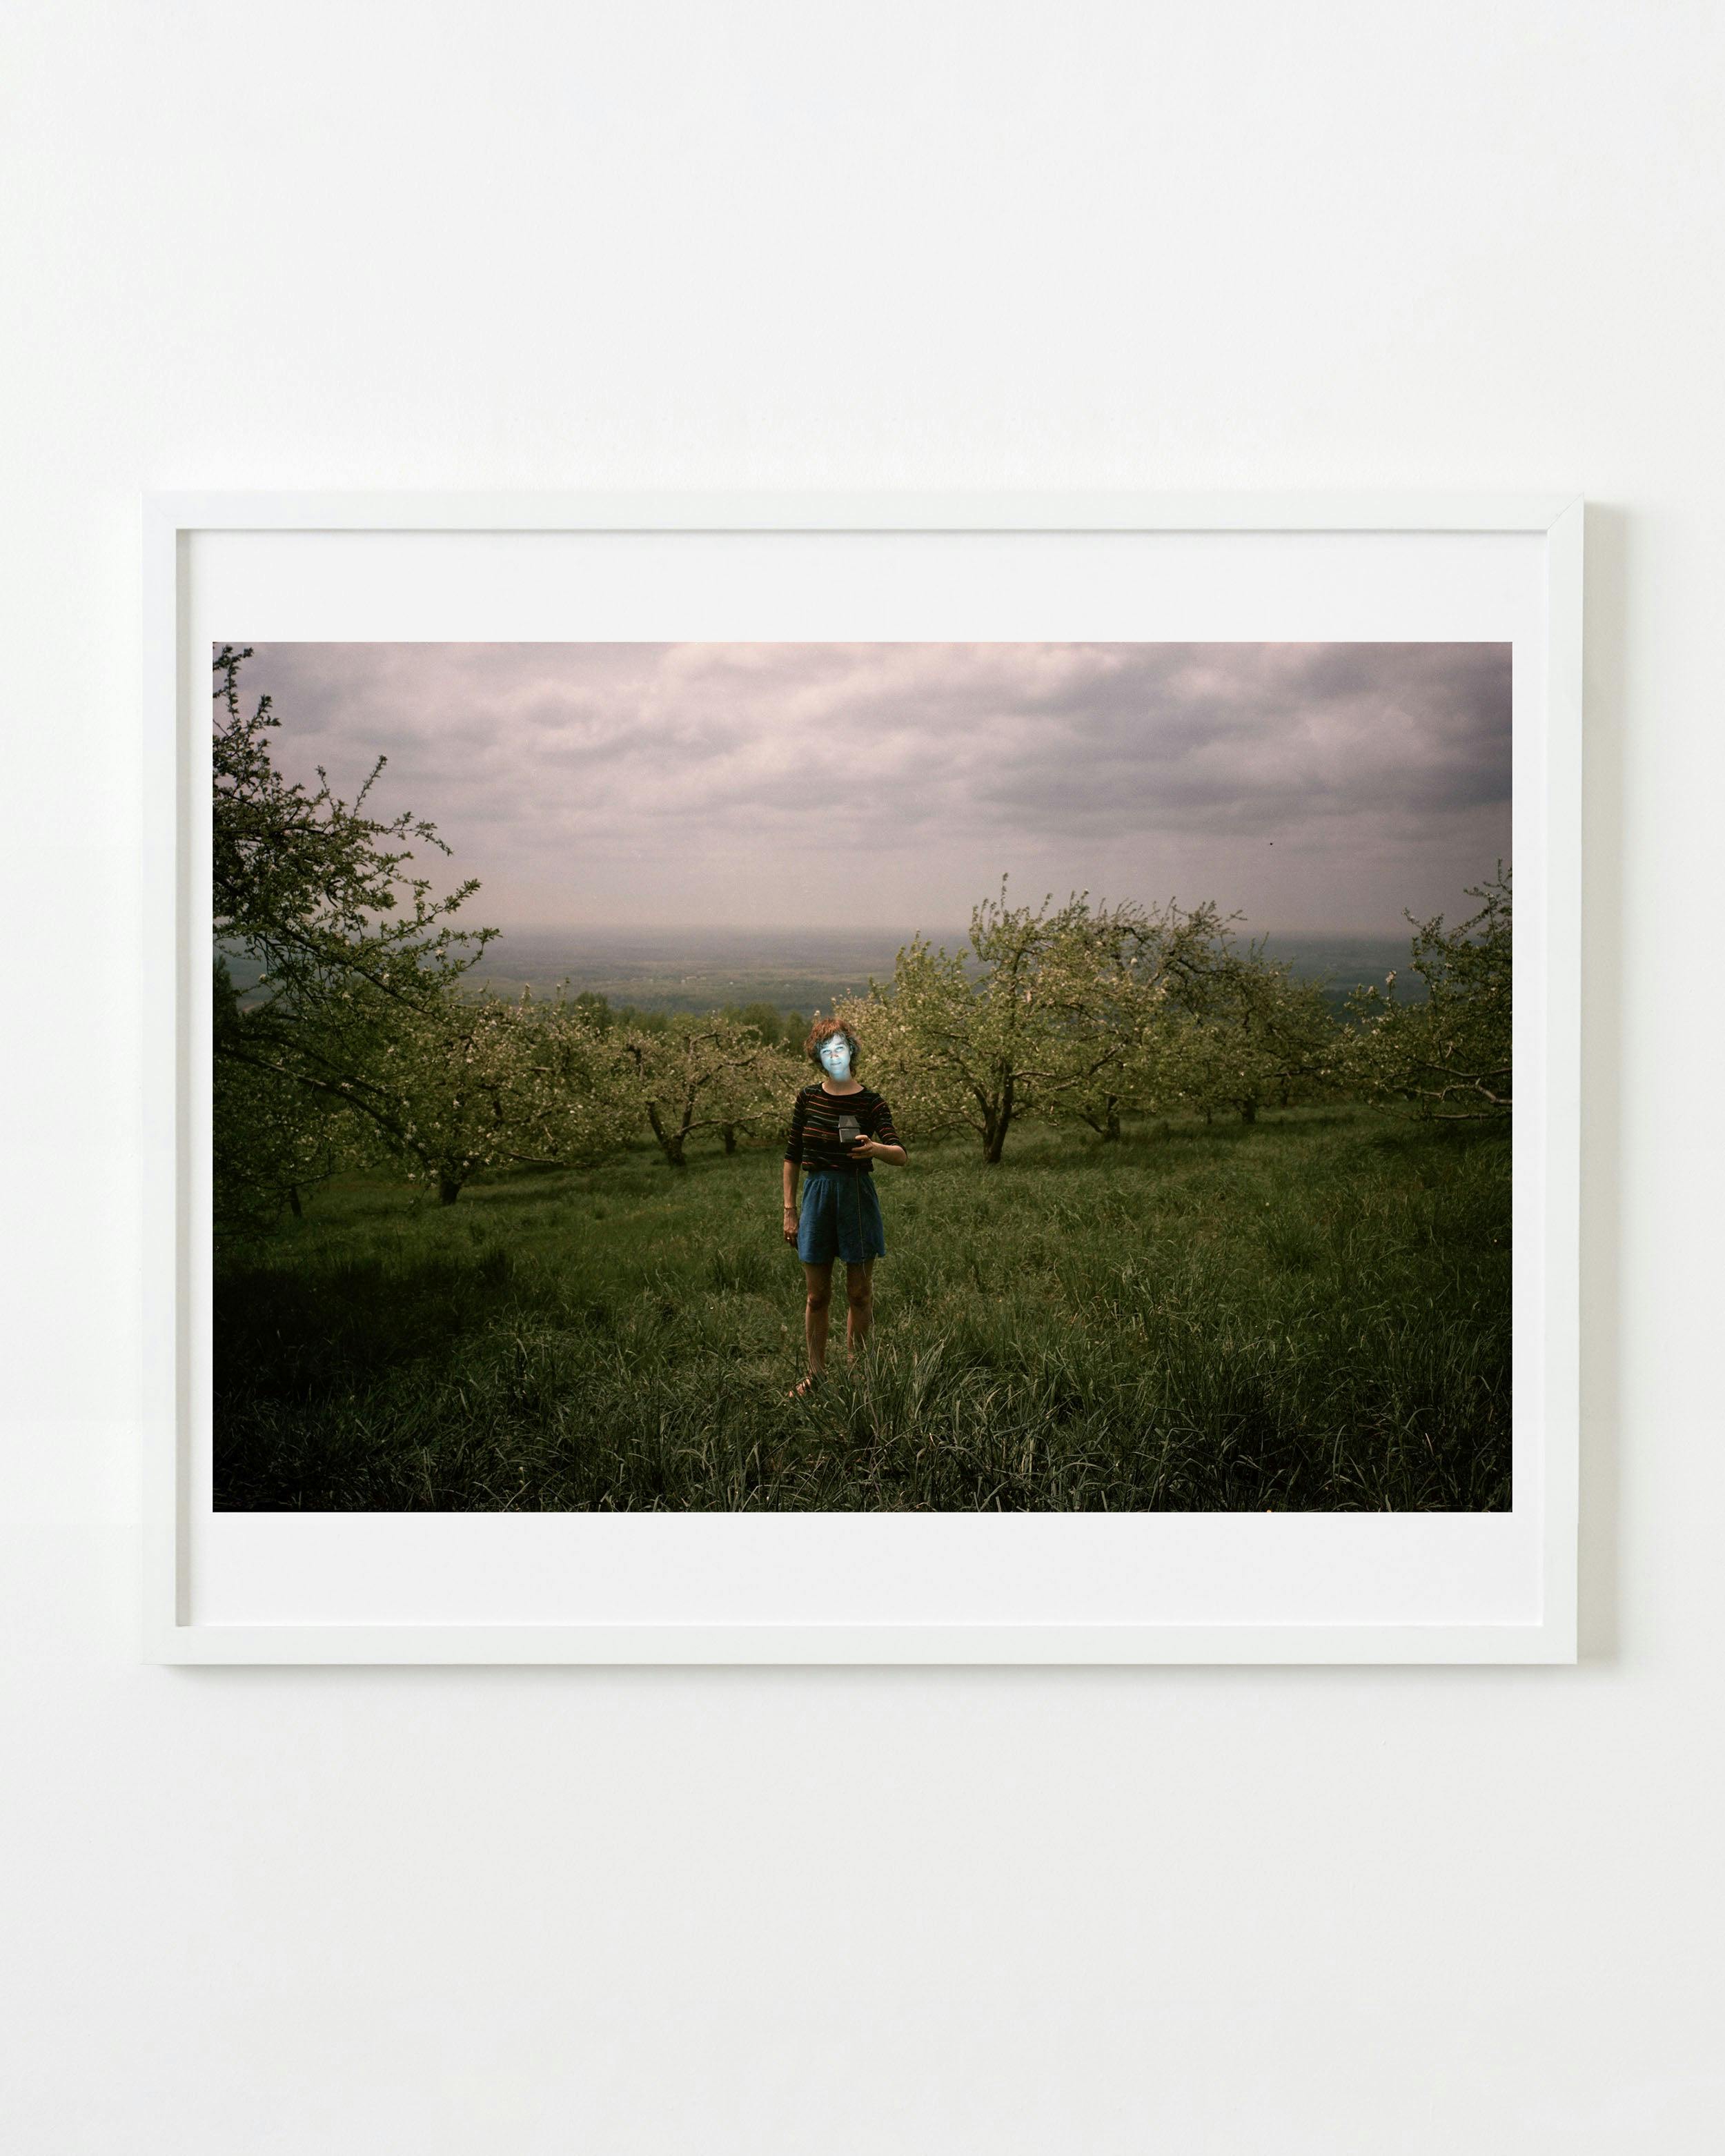 Photography by Michael Northrup titled "Orchard Glow".